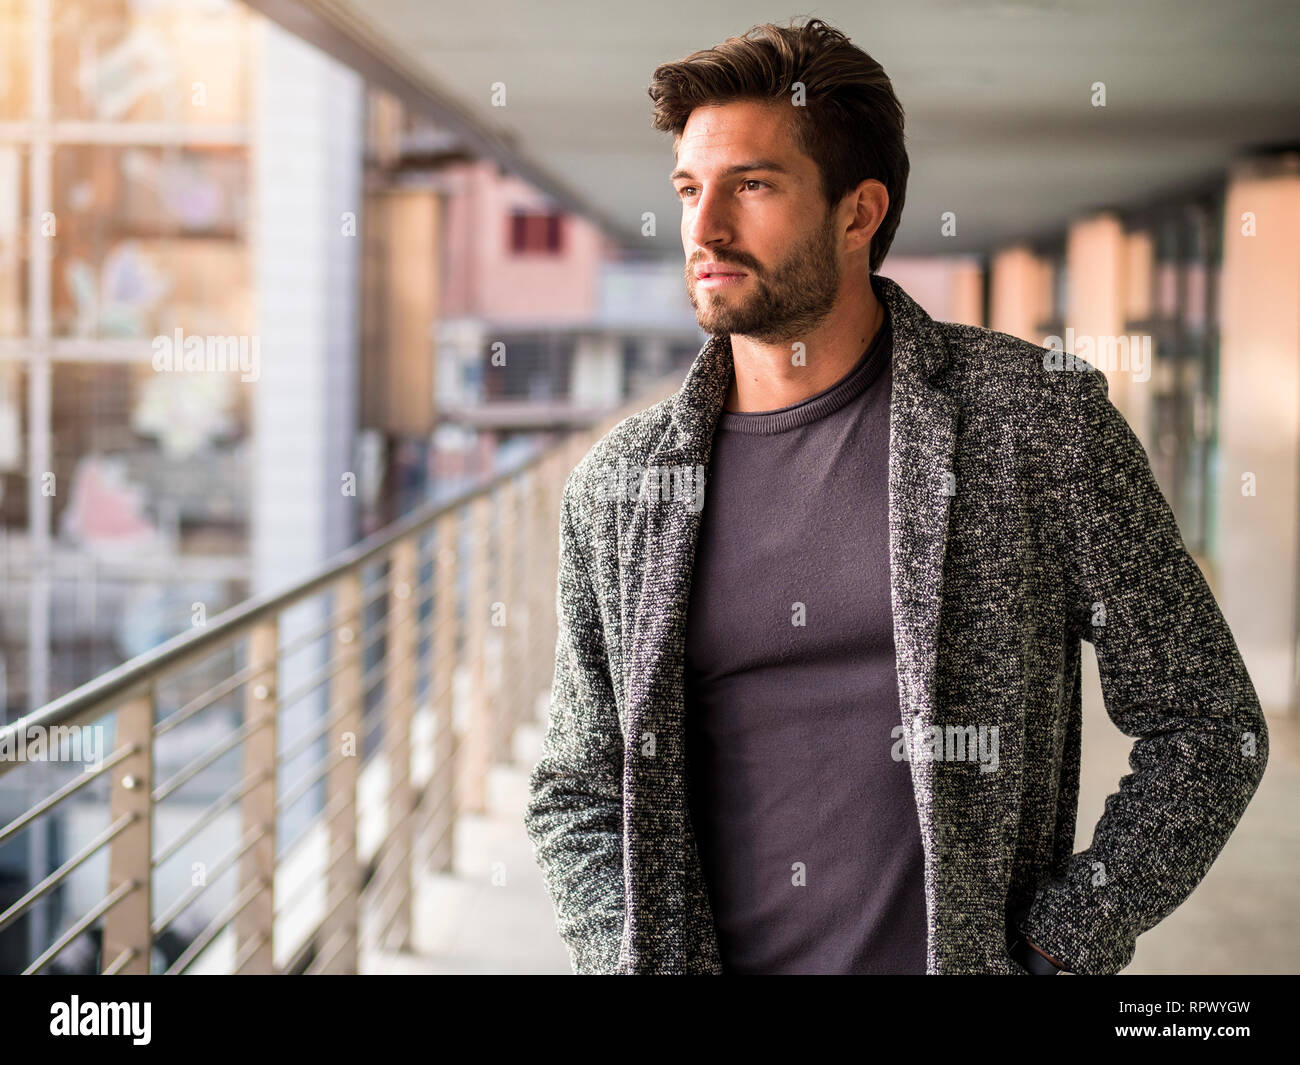 One handsome young man in city setting Stock Photo - Alamy